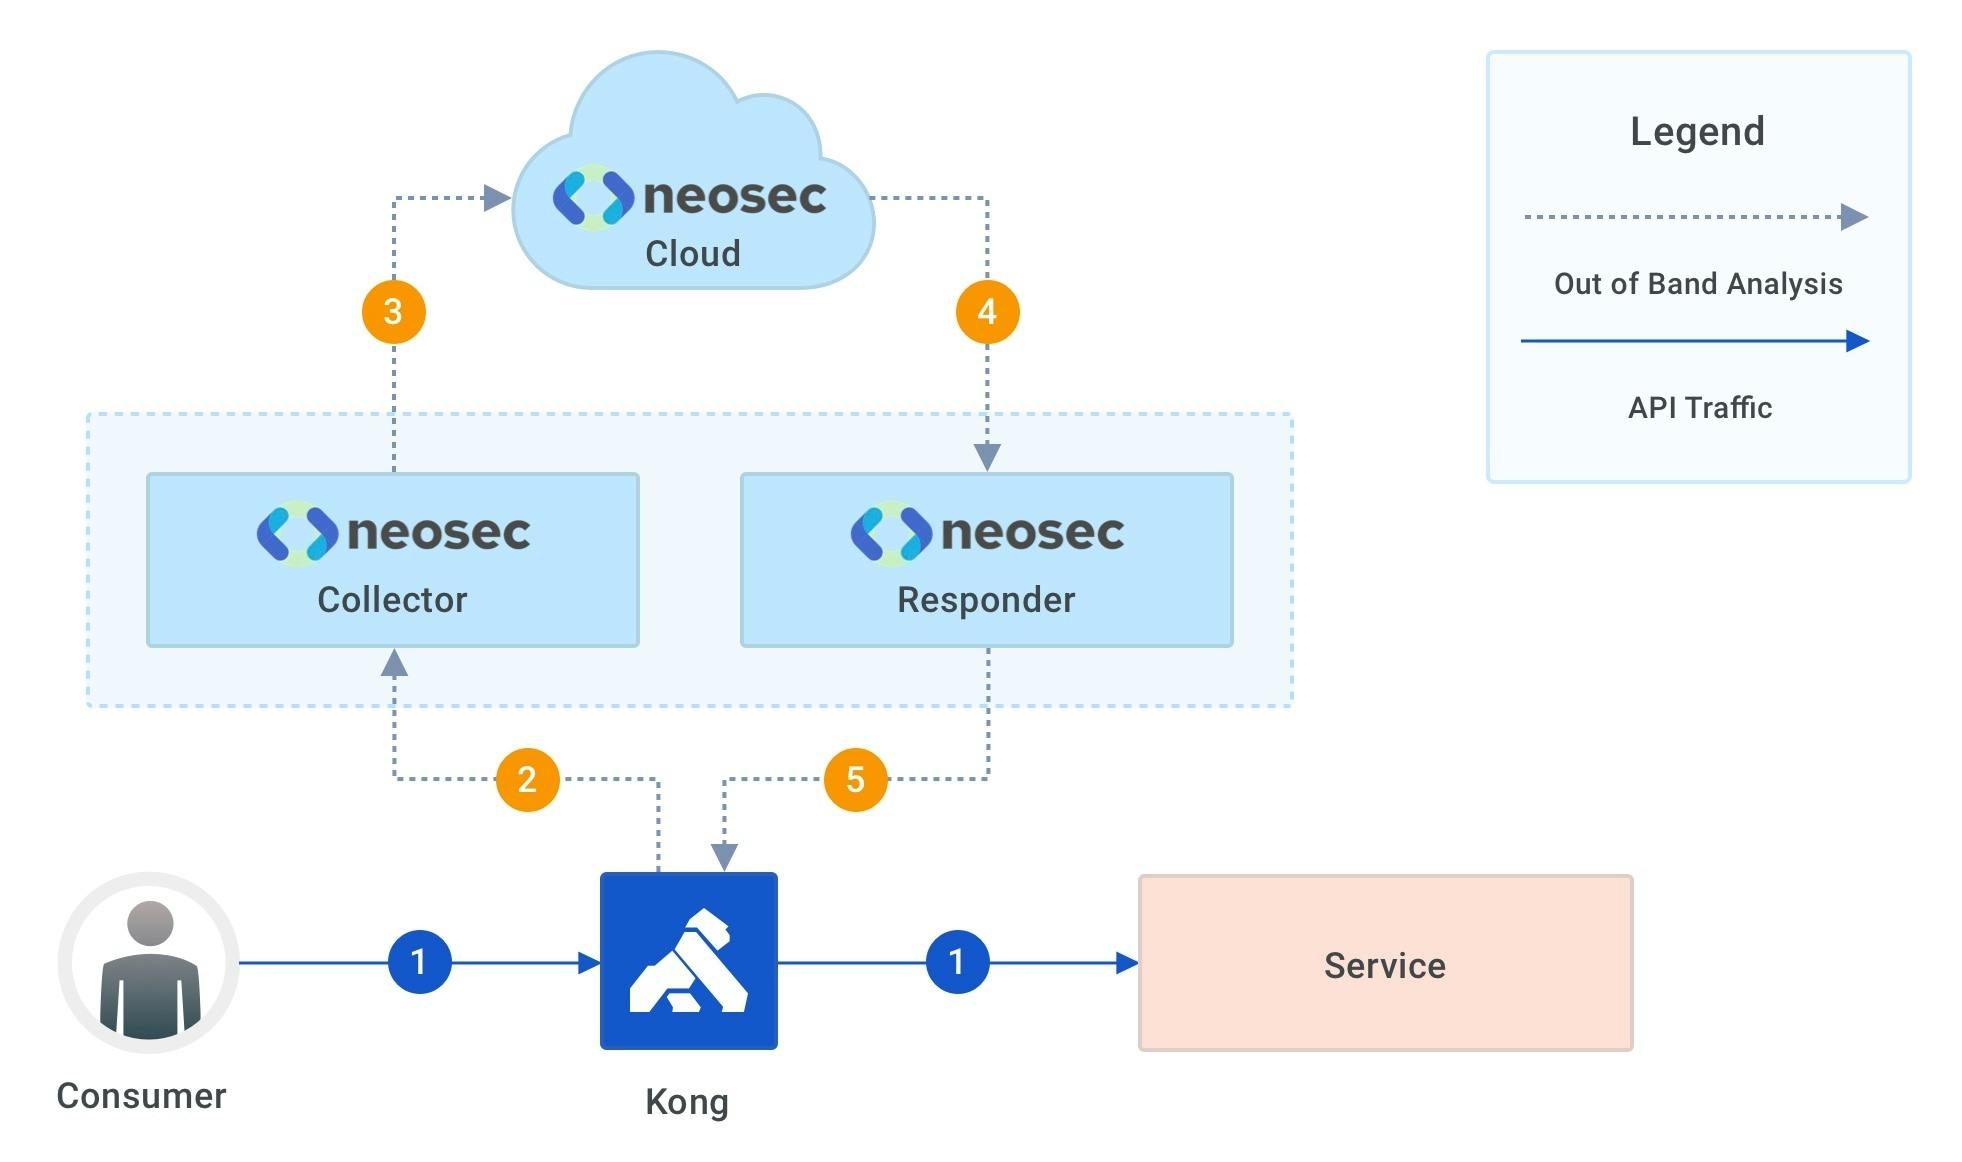 Kong and Neosec Architecture